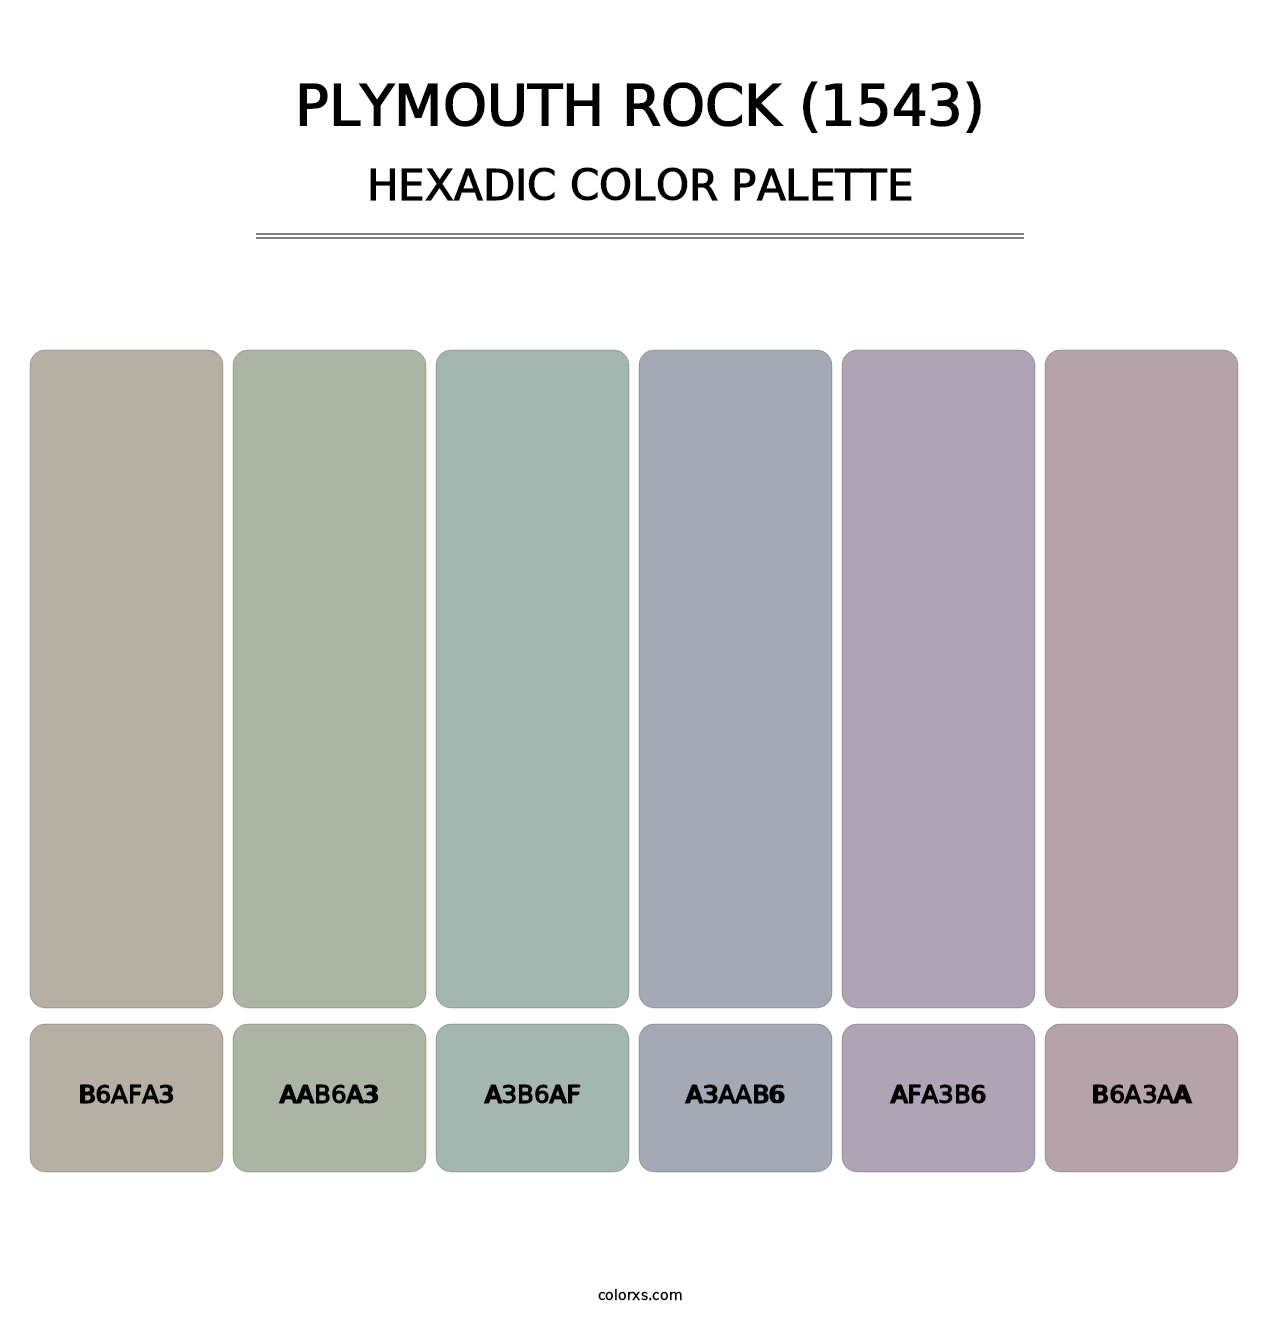 Plymouth Rock (1543) - Hexadic Color Palette